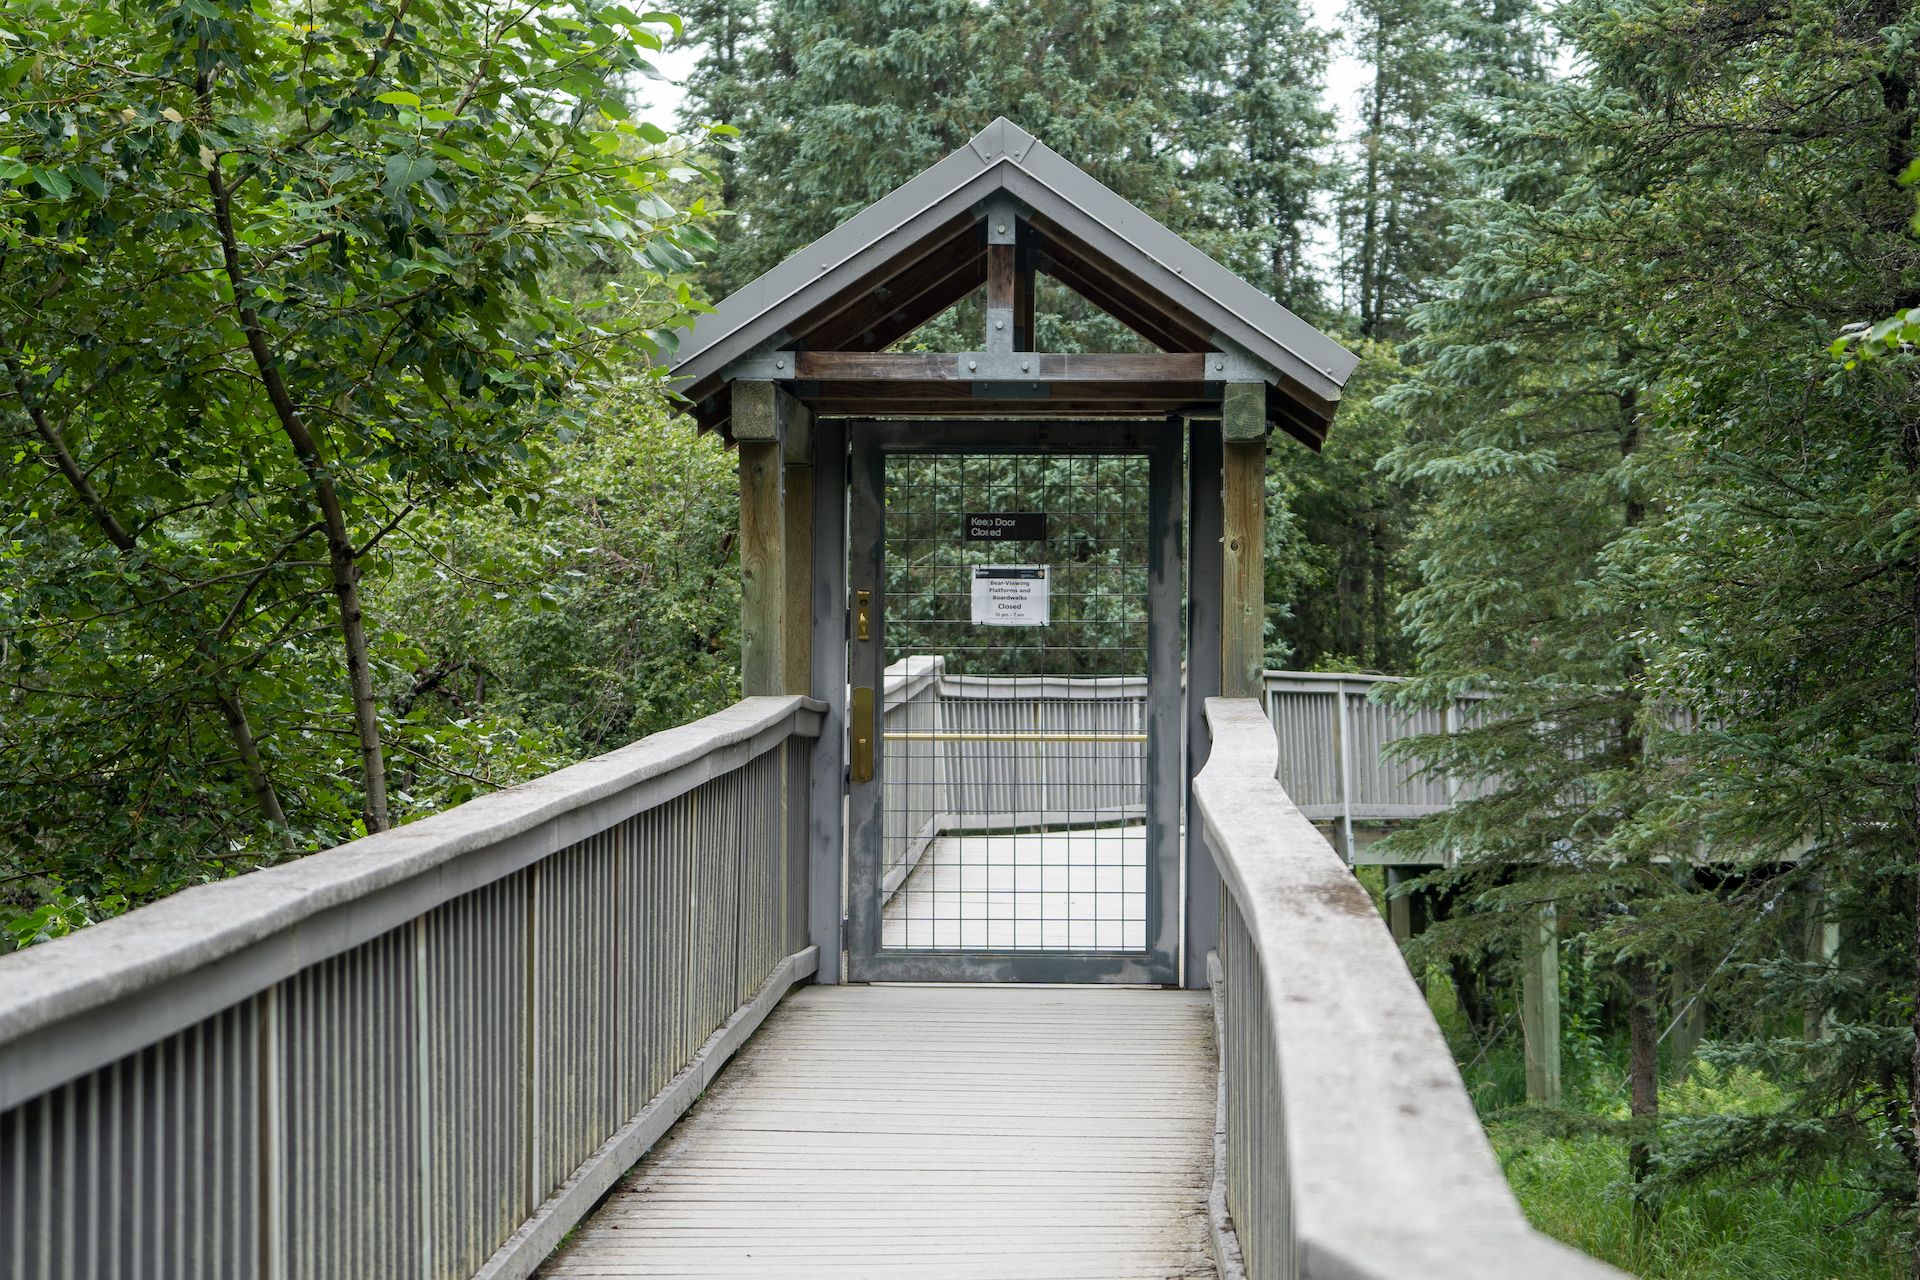 Multiple gates are installed on the bridge to prevent the bears from passing from one section to an another.